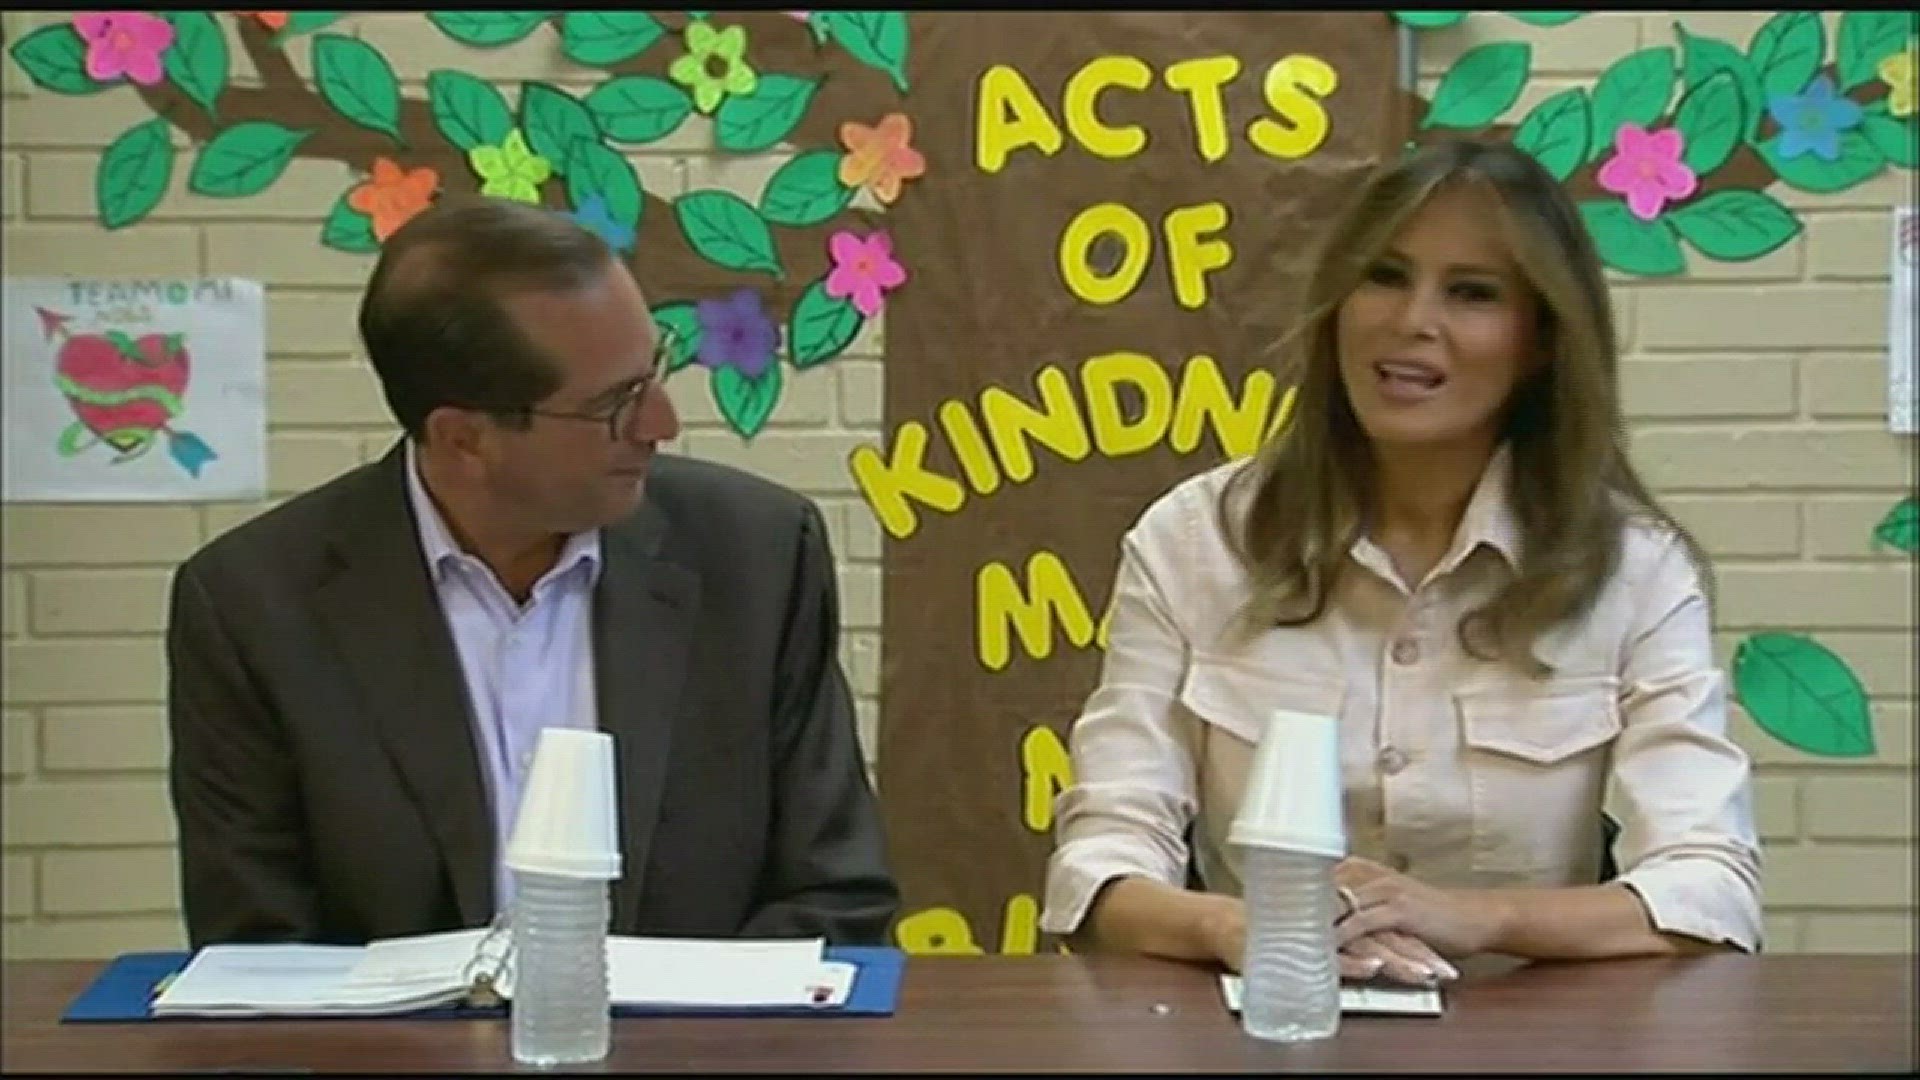 First Lady Melania Trump visited the border to offer her help to reunite separated families.